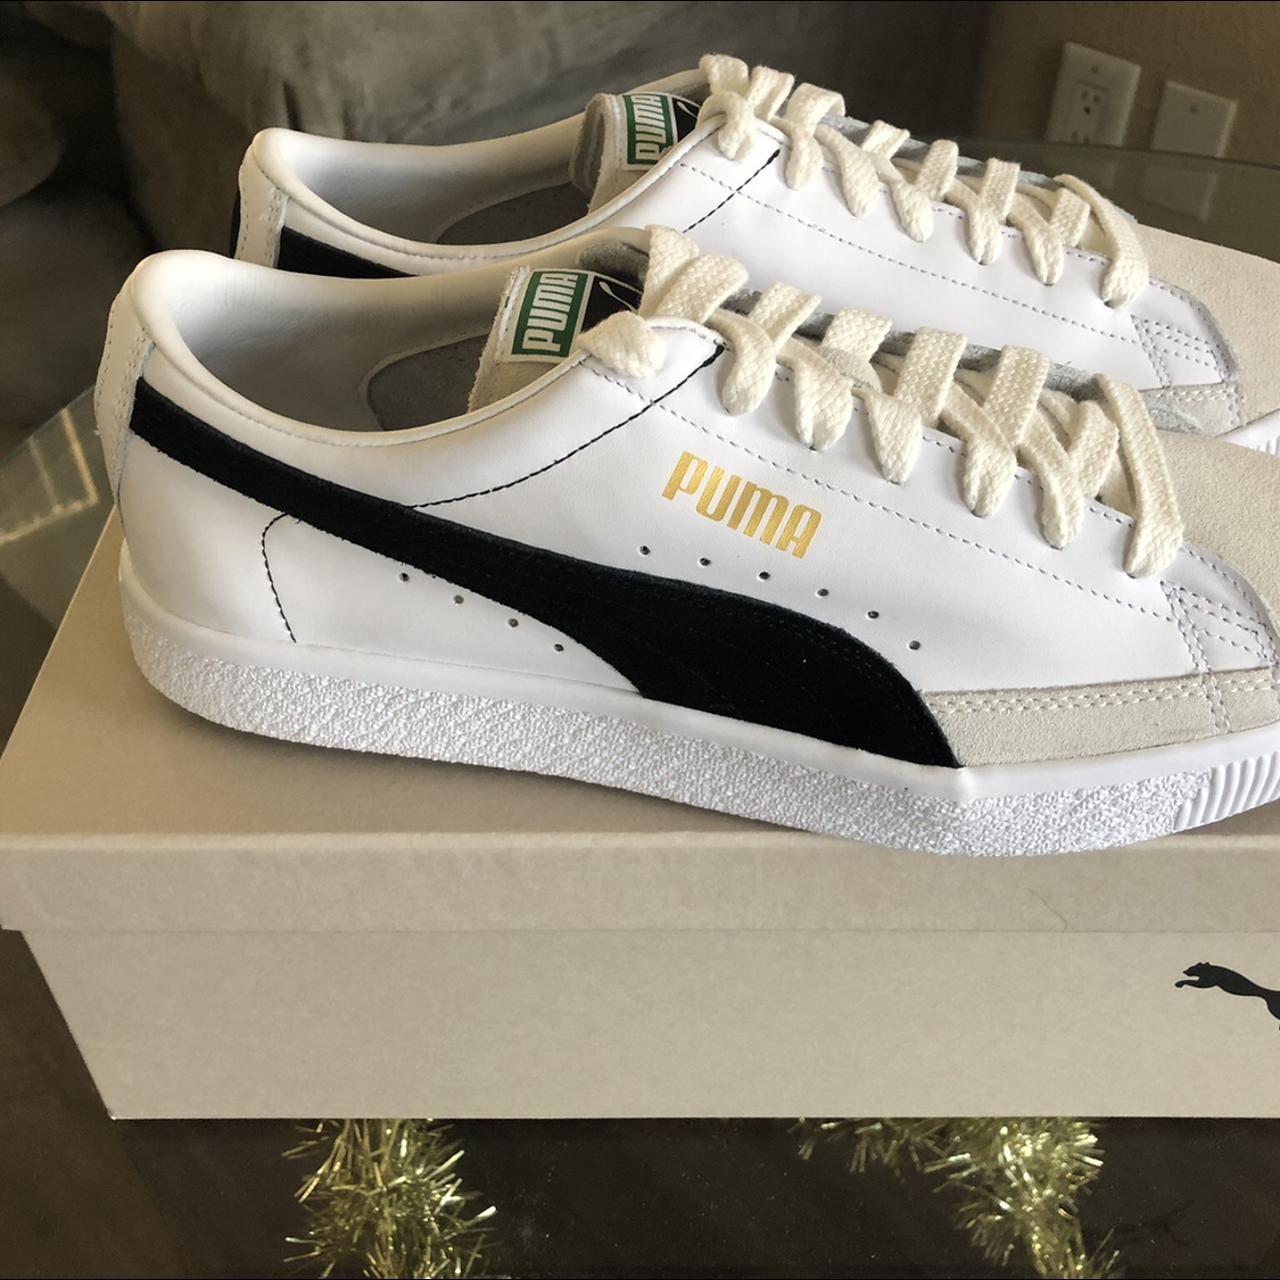 Jay-Z's Budget-Friendly Puma Sneakers Are Your Next Summer Flex